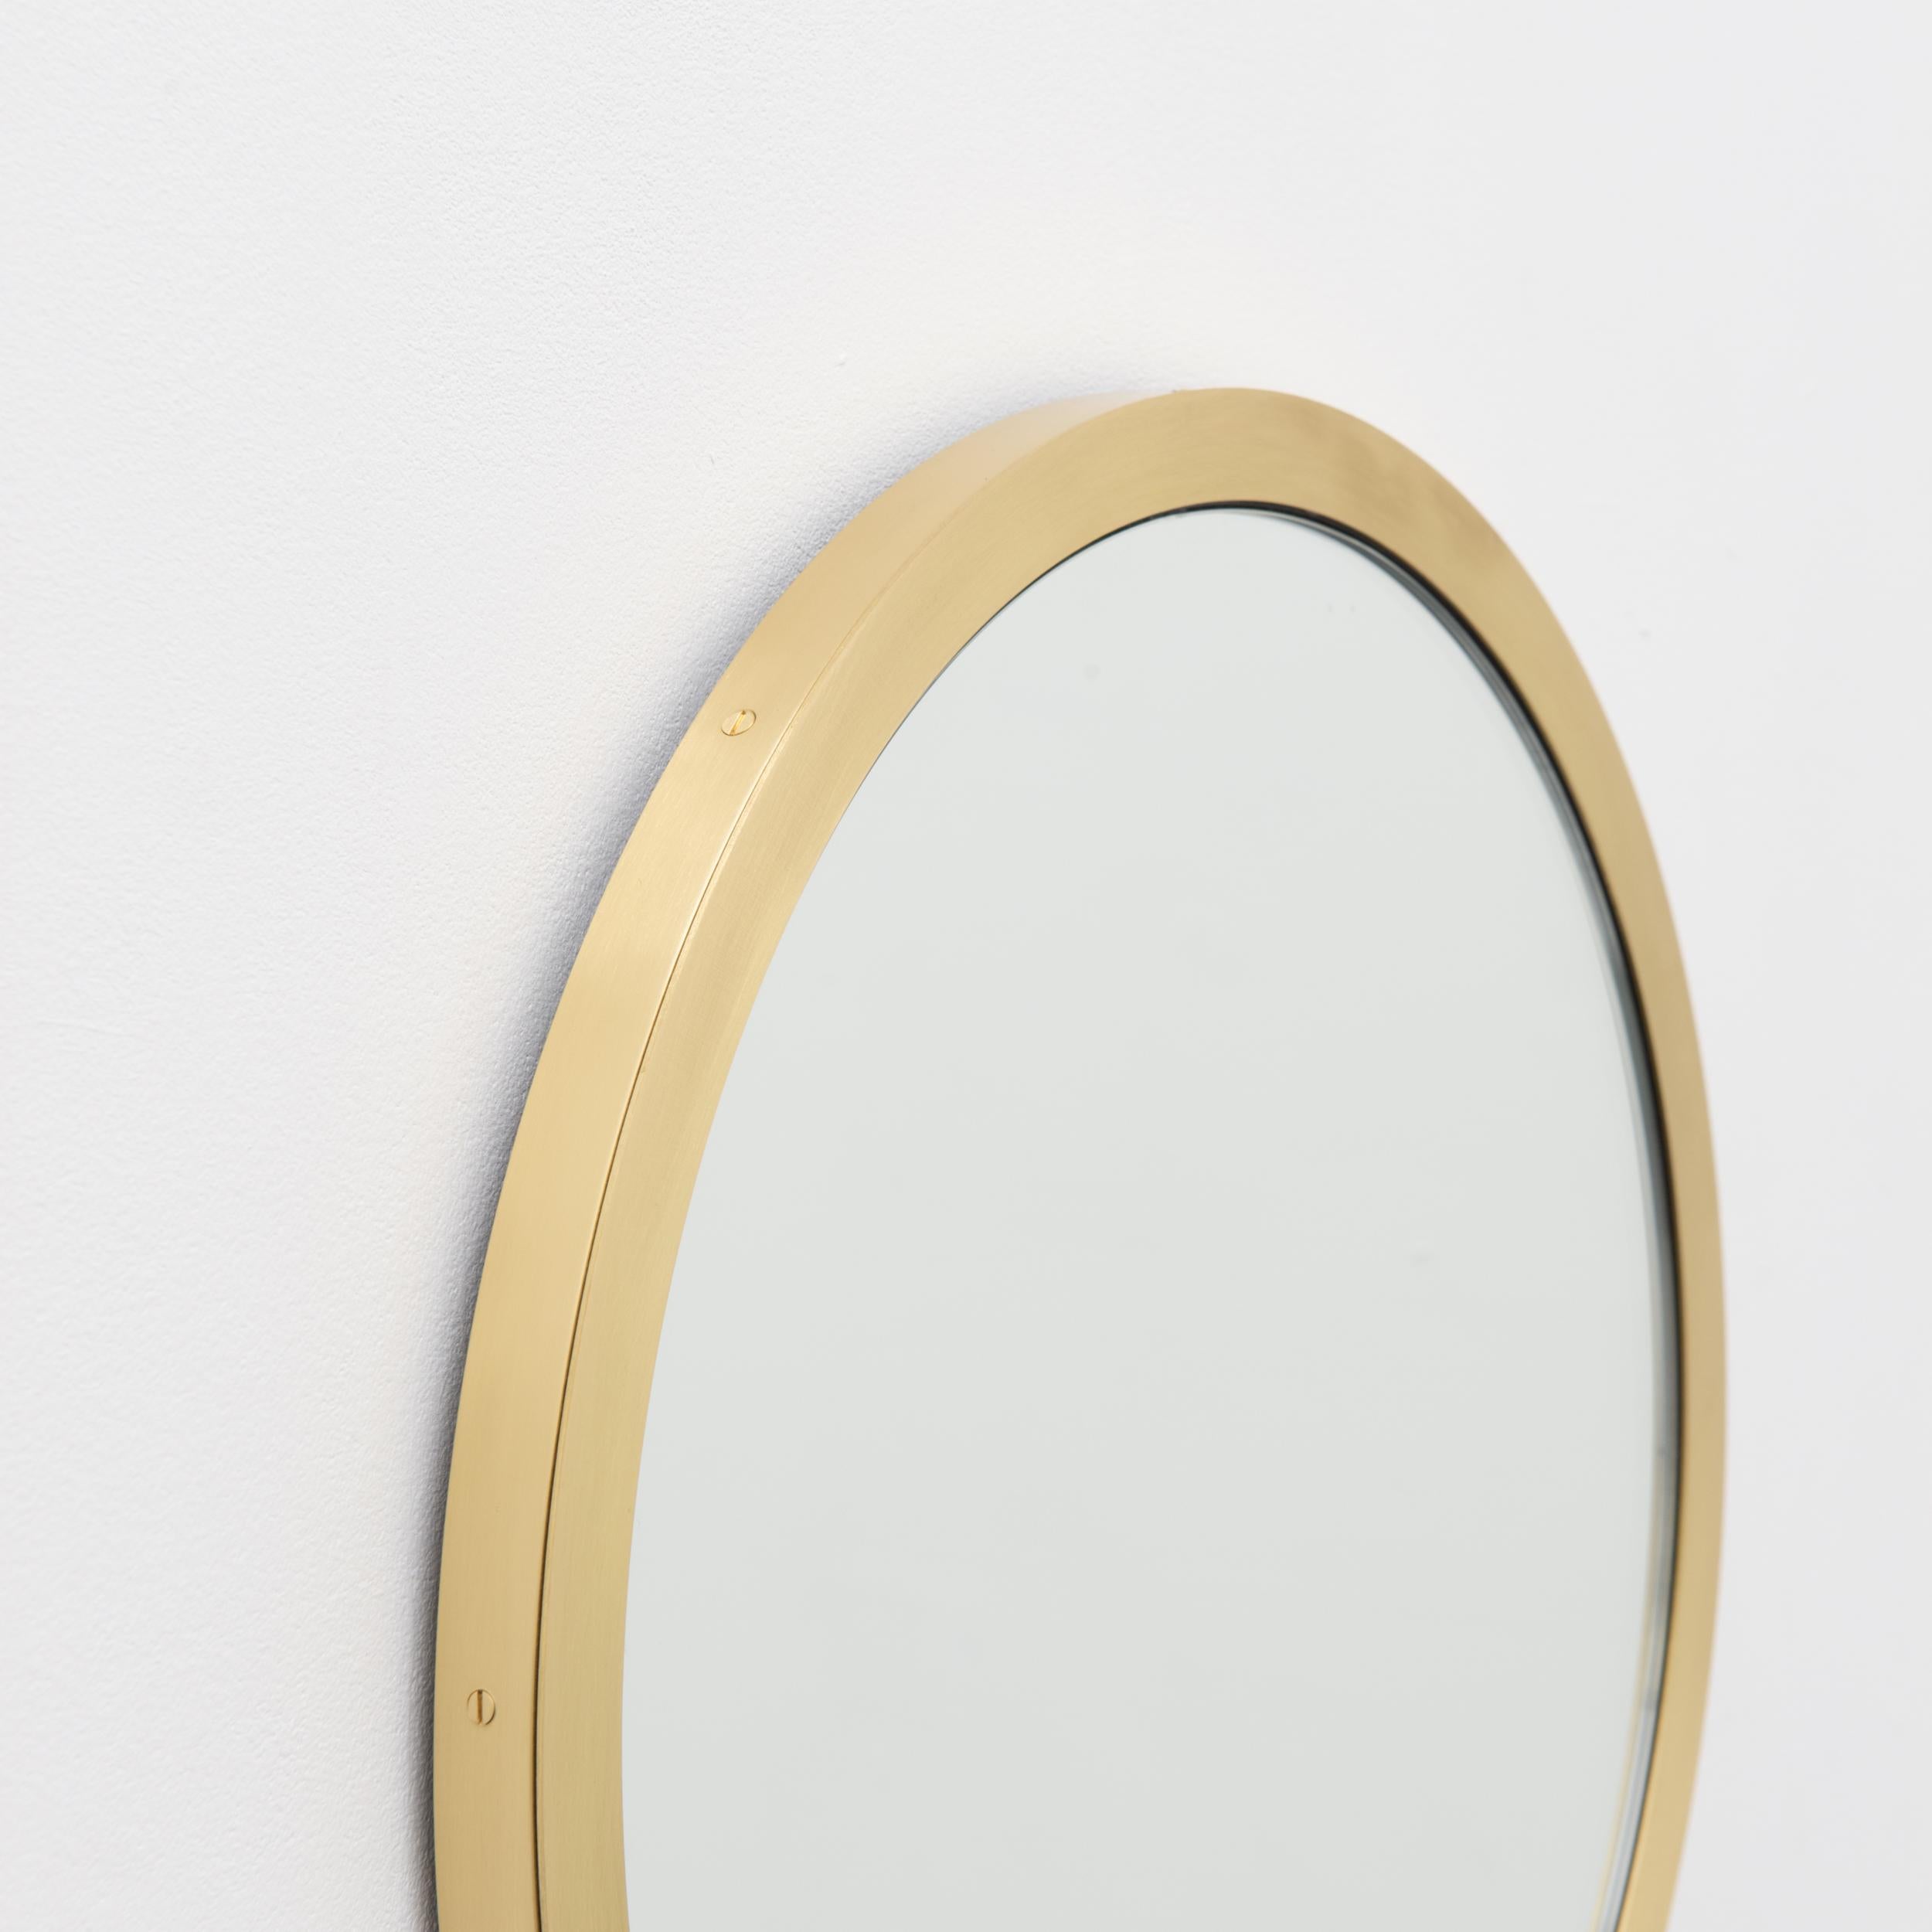 Orbis Round Art Deco Mirror with Full Brushed Brass Frame, Medium For Sale 3